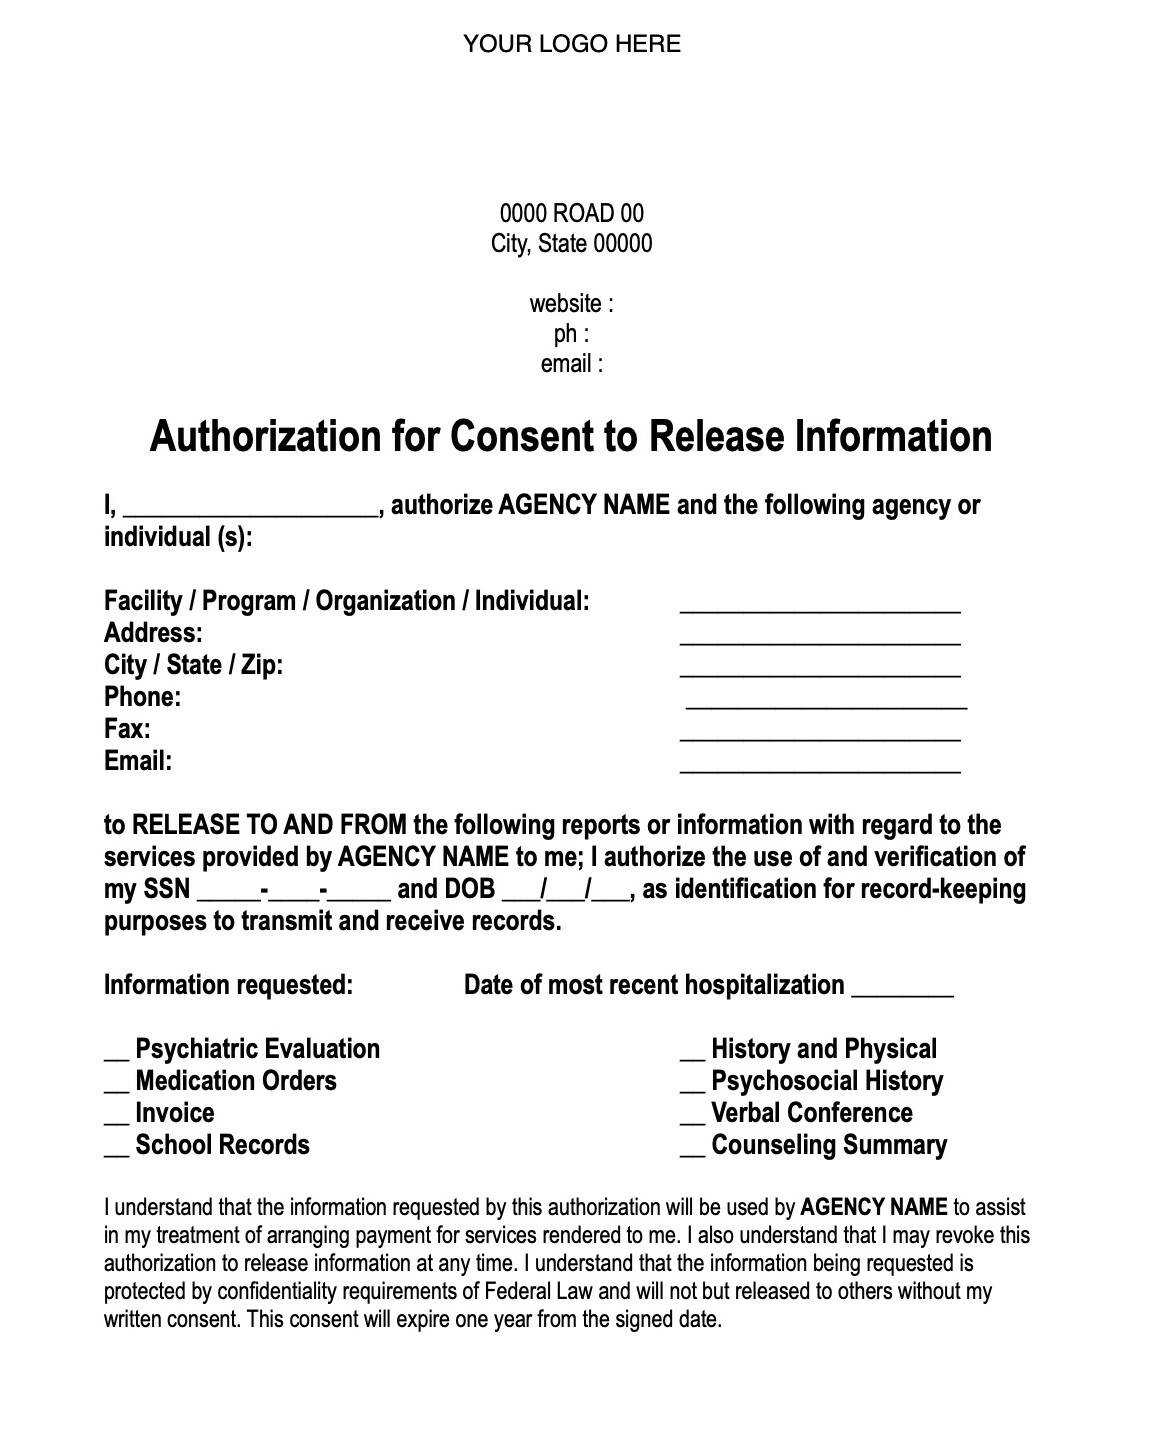 Consent to Release Information